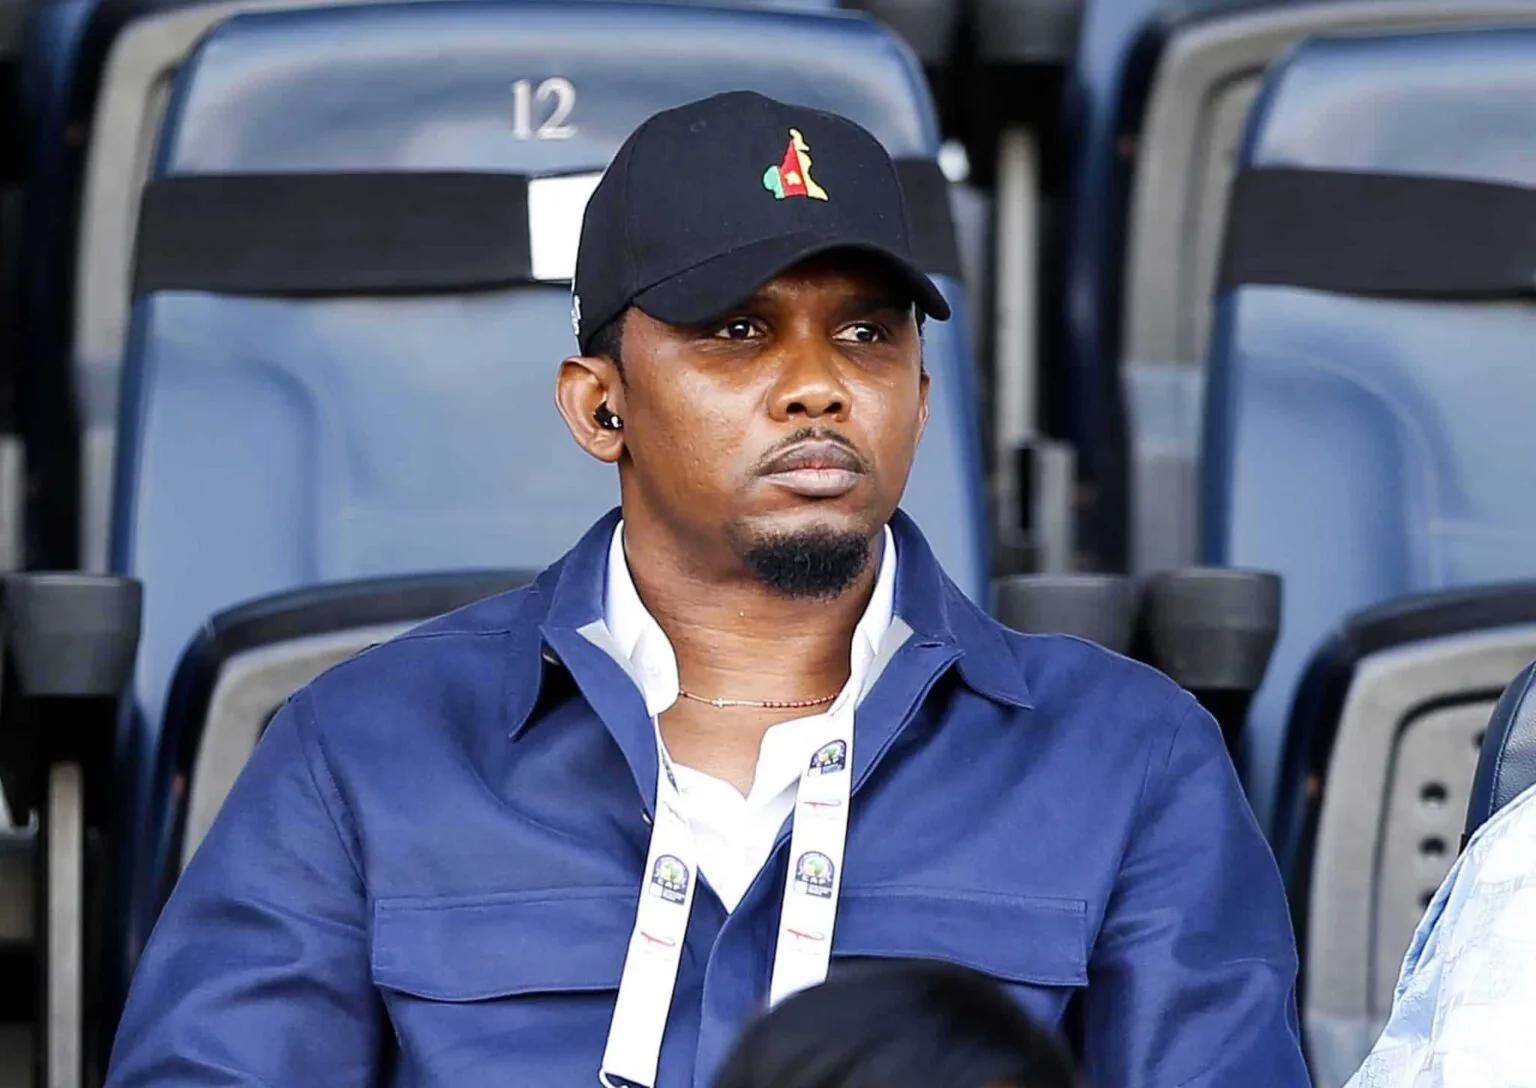 Samuel Eto'o faces mounting challenges as Fecafoot president